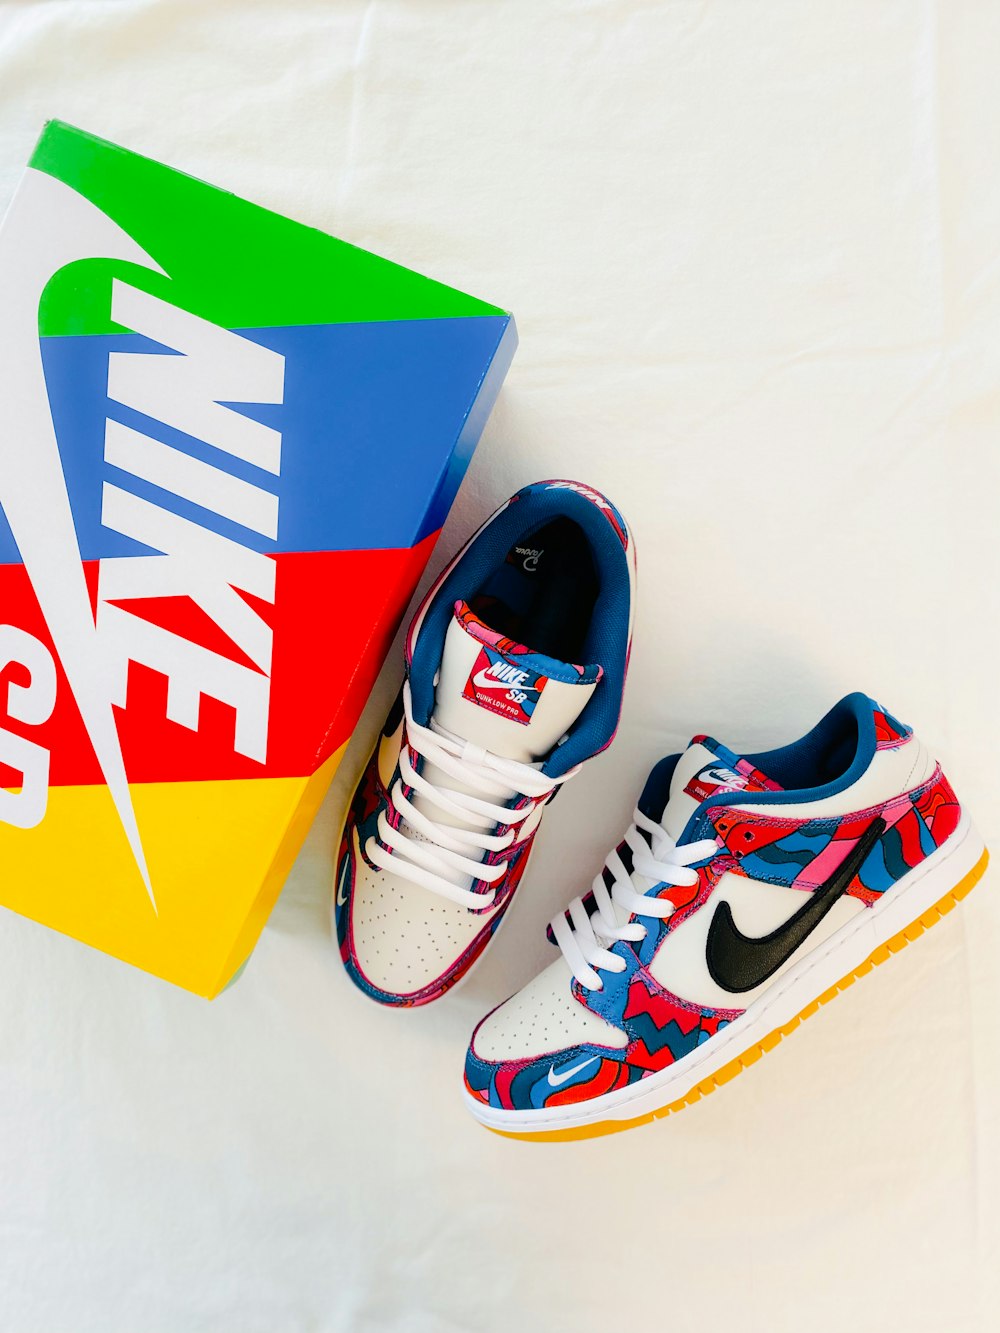 a pair of sneakers and a box on a white surface